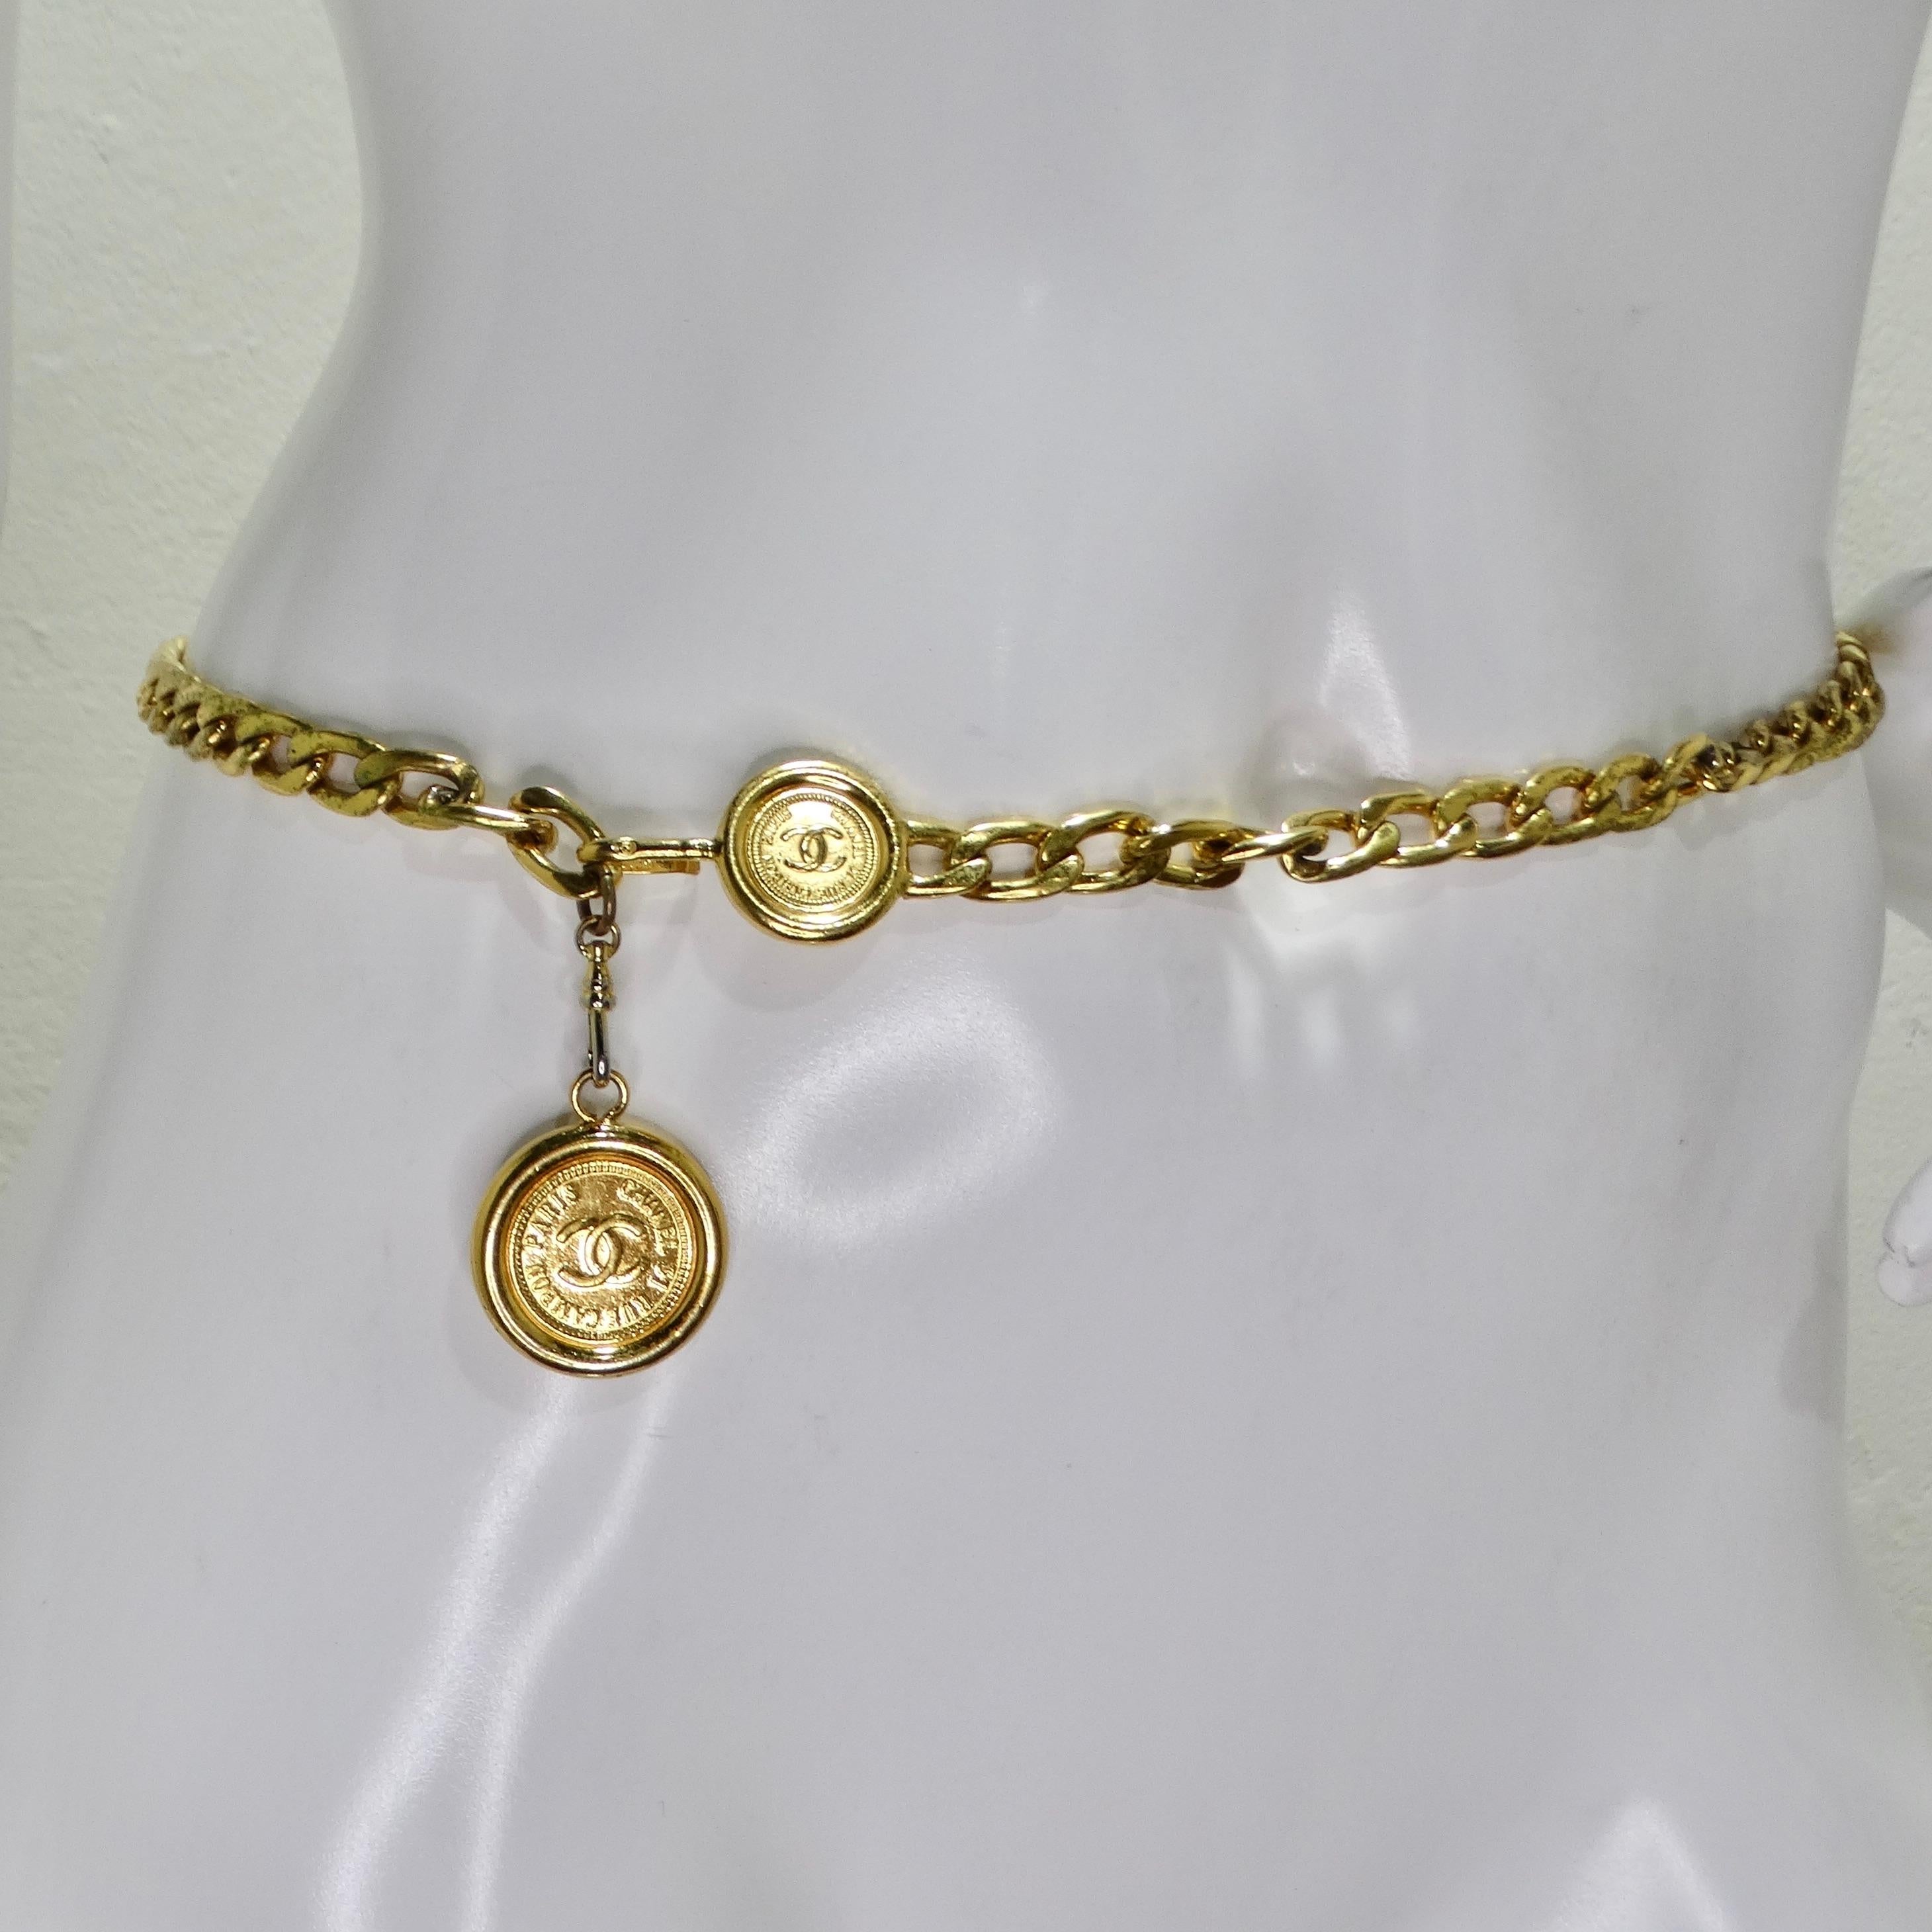 Introducing the iconic Chanel Spring 1994 Gold Tone CC Medallion Chain Belt, a vintage treasure that exudes timeless elegance and sophistication. Crafted from yellow gold-plated chain, this belt features Chanel's signature interlocking CC logo